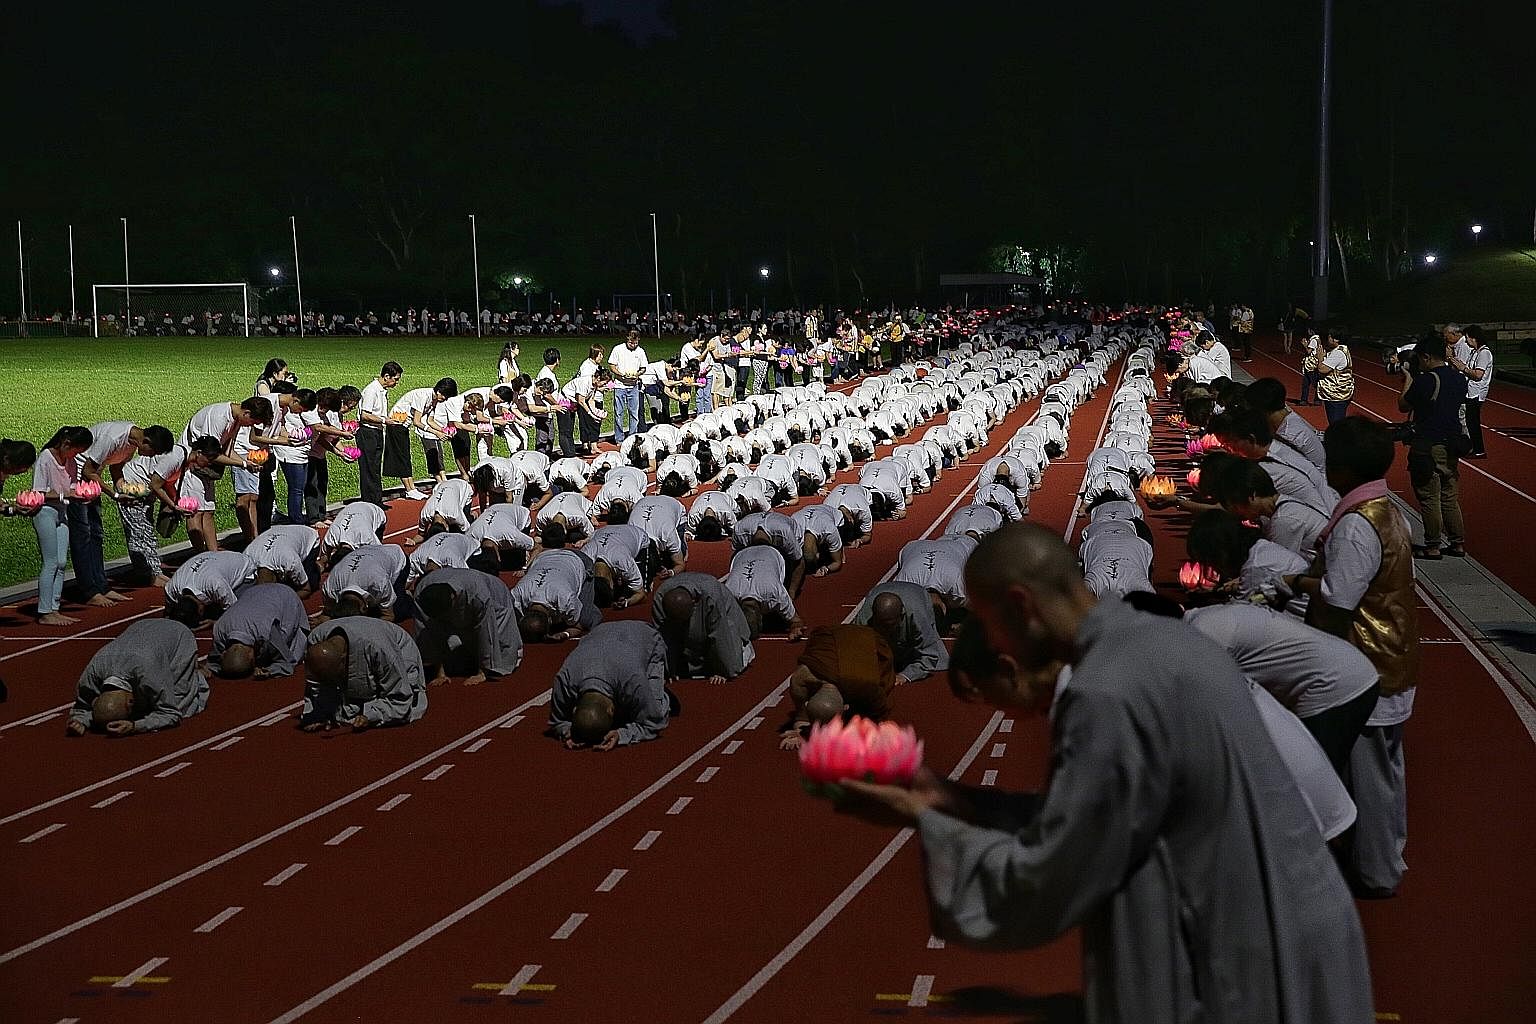 Thousands of Buddhists taking part in the "three steps, one bow" ceremony at the Bukit Gombak Stadium as part of Vesak Day celebrations. The three-hour repetitive sequence is a practice in humility, where Buddhists prostrate mindfully in unison. At t